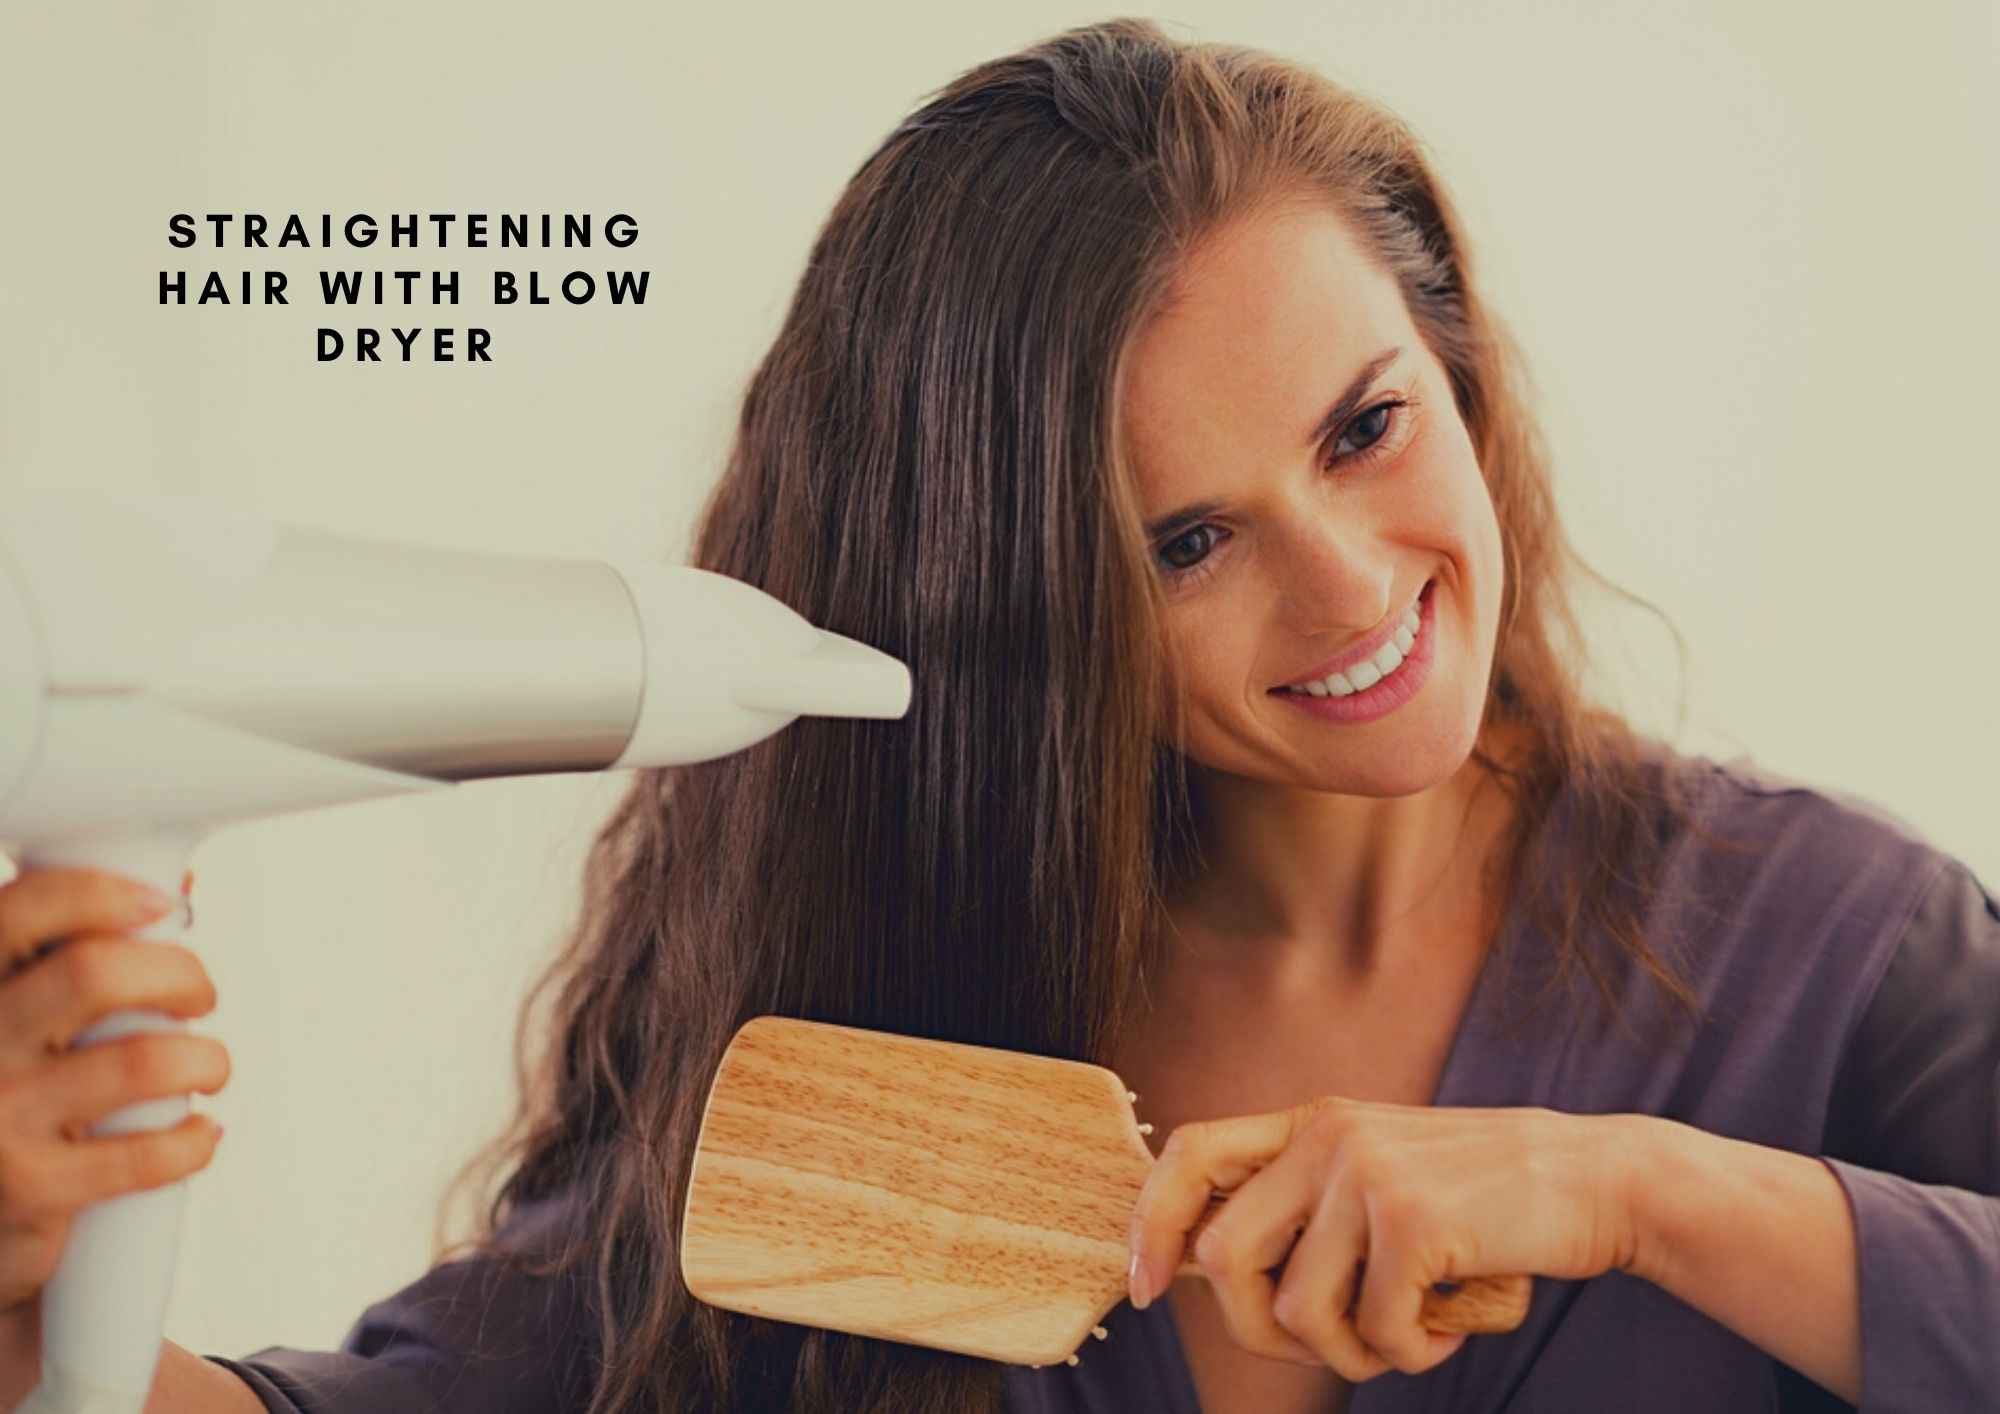 How To Straighten Hair With Blow Dryer In 6 Easy Steps 2023 - Hair Everyday  Review